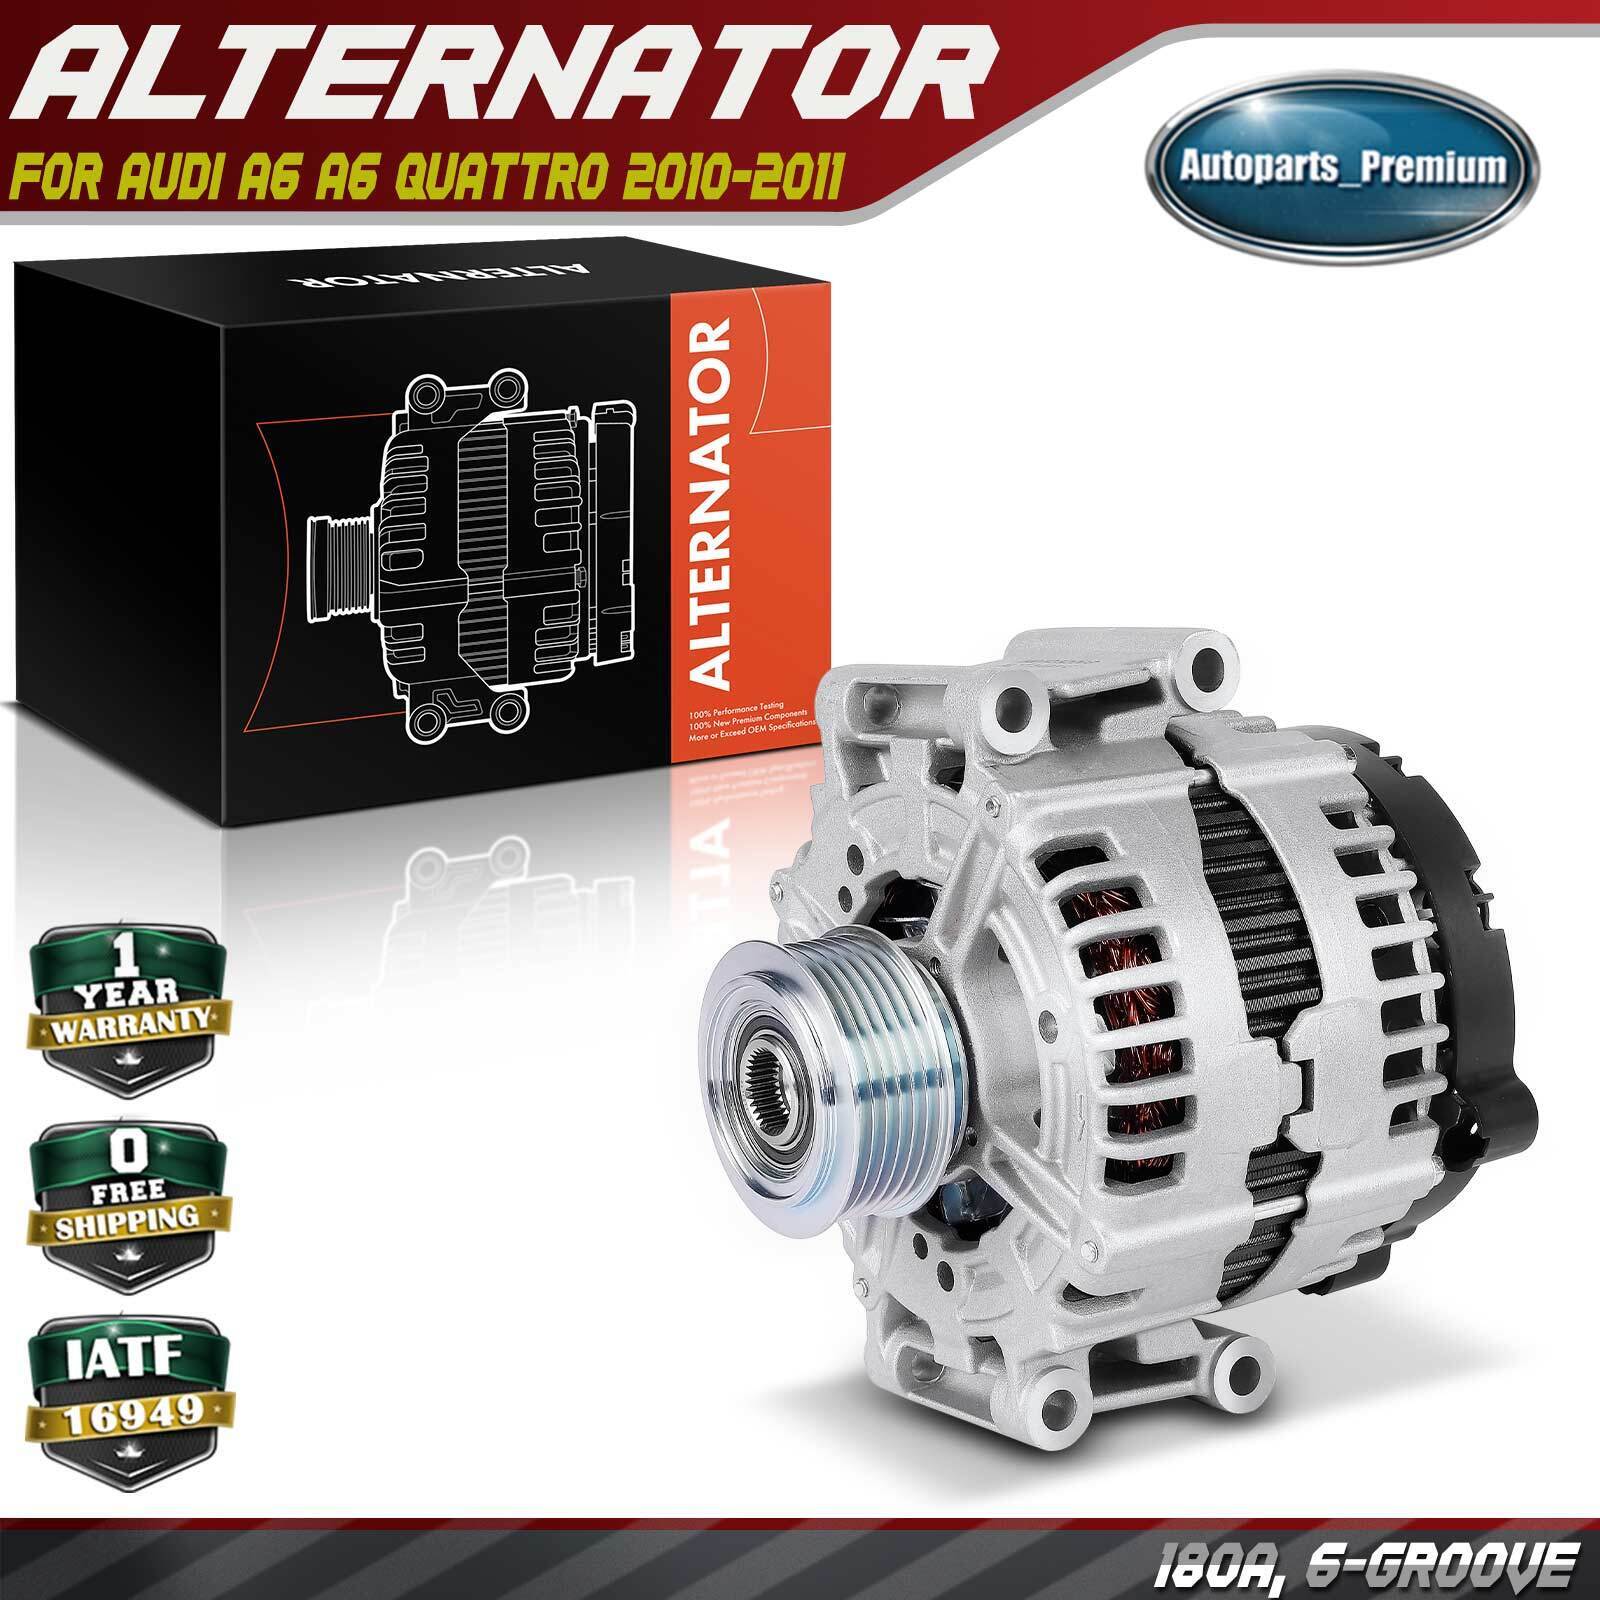 Alternator for Audi A6 A6 Quattro 2010-2011 180 A 12 V CW 6-Groove Clutch Pulley